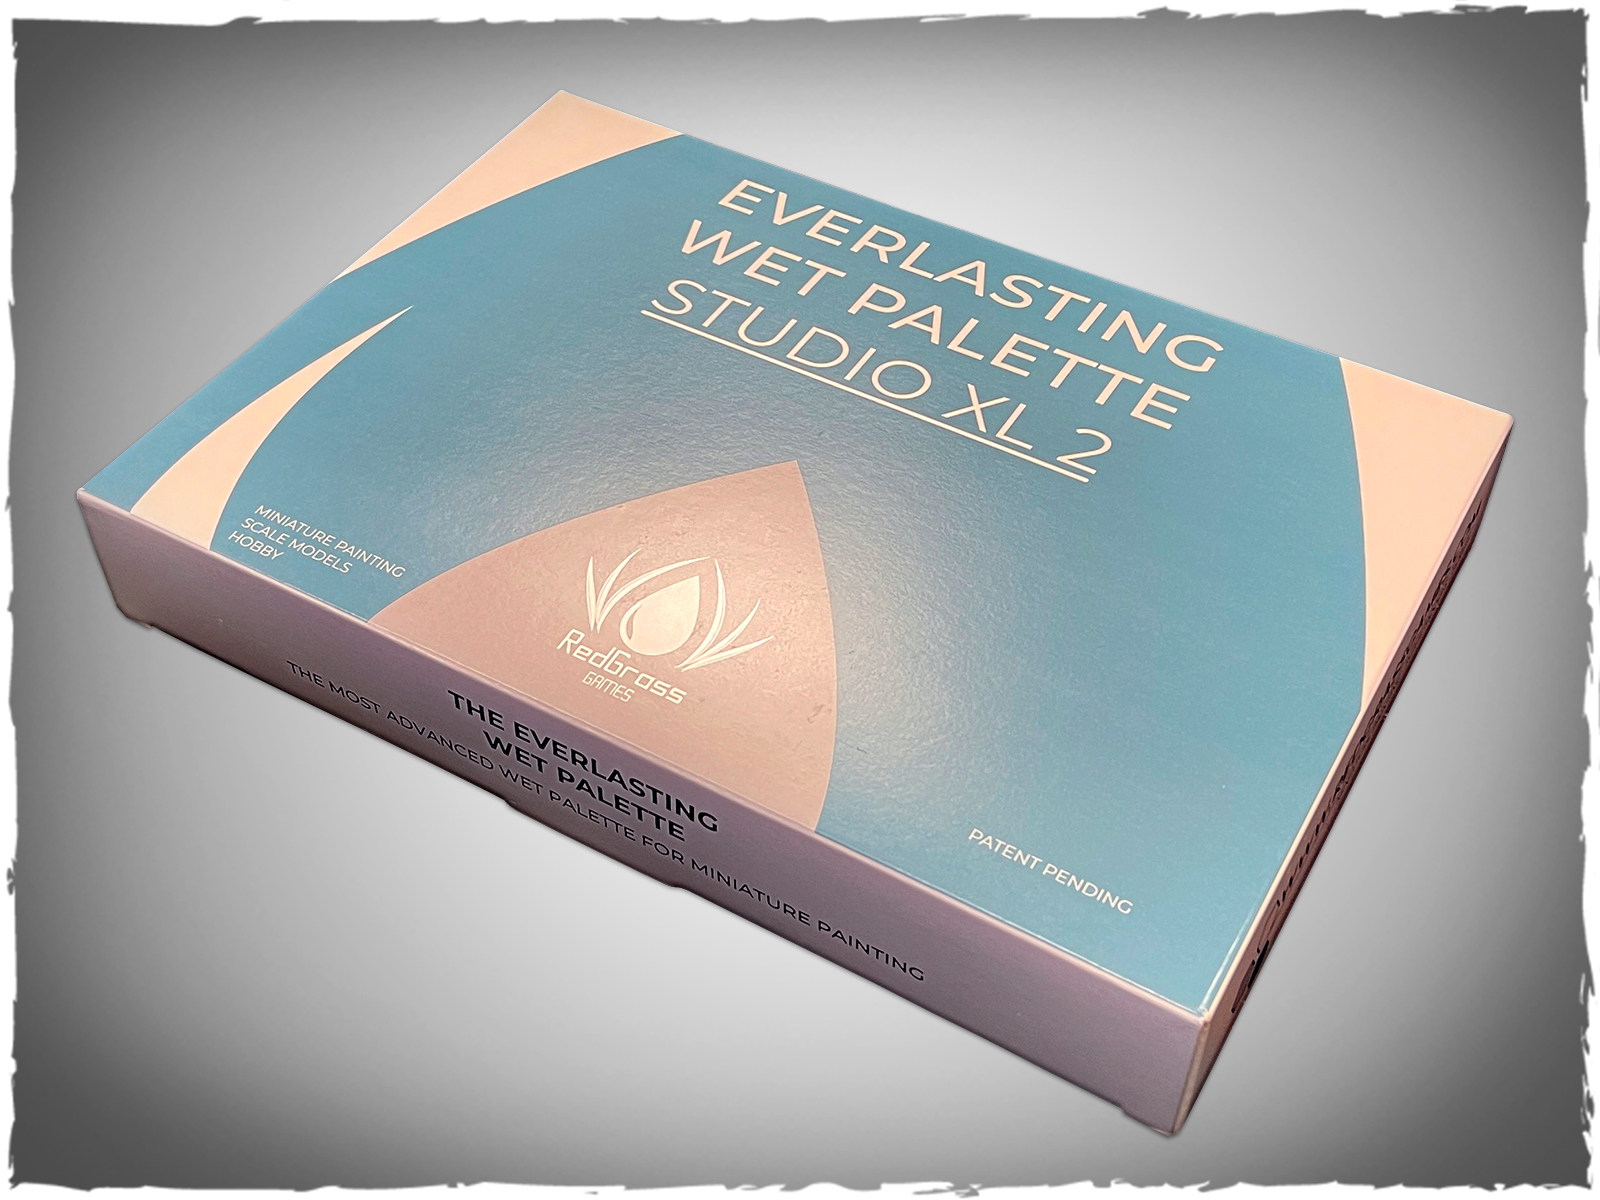 Everlasting: the Best Wet Palette for miniature painting by